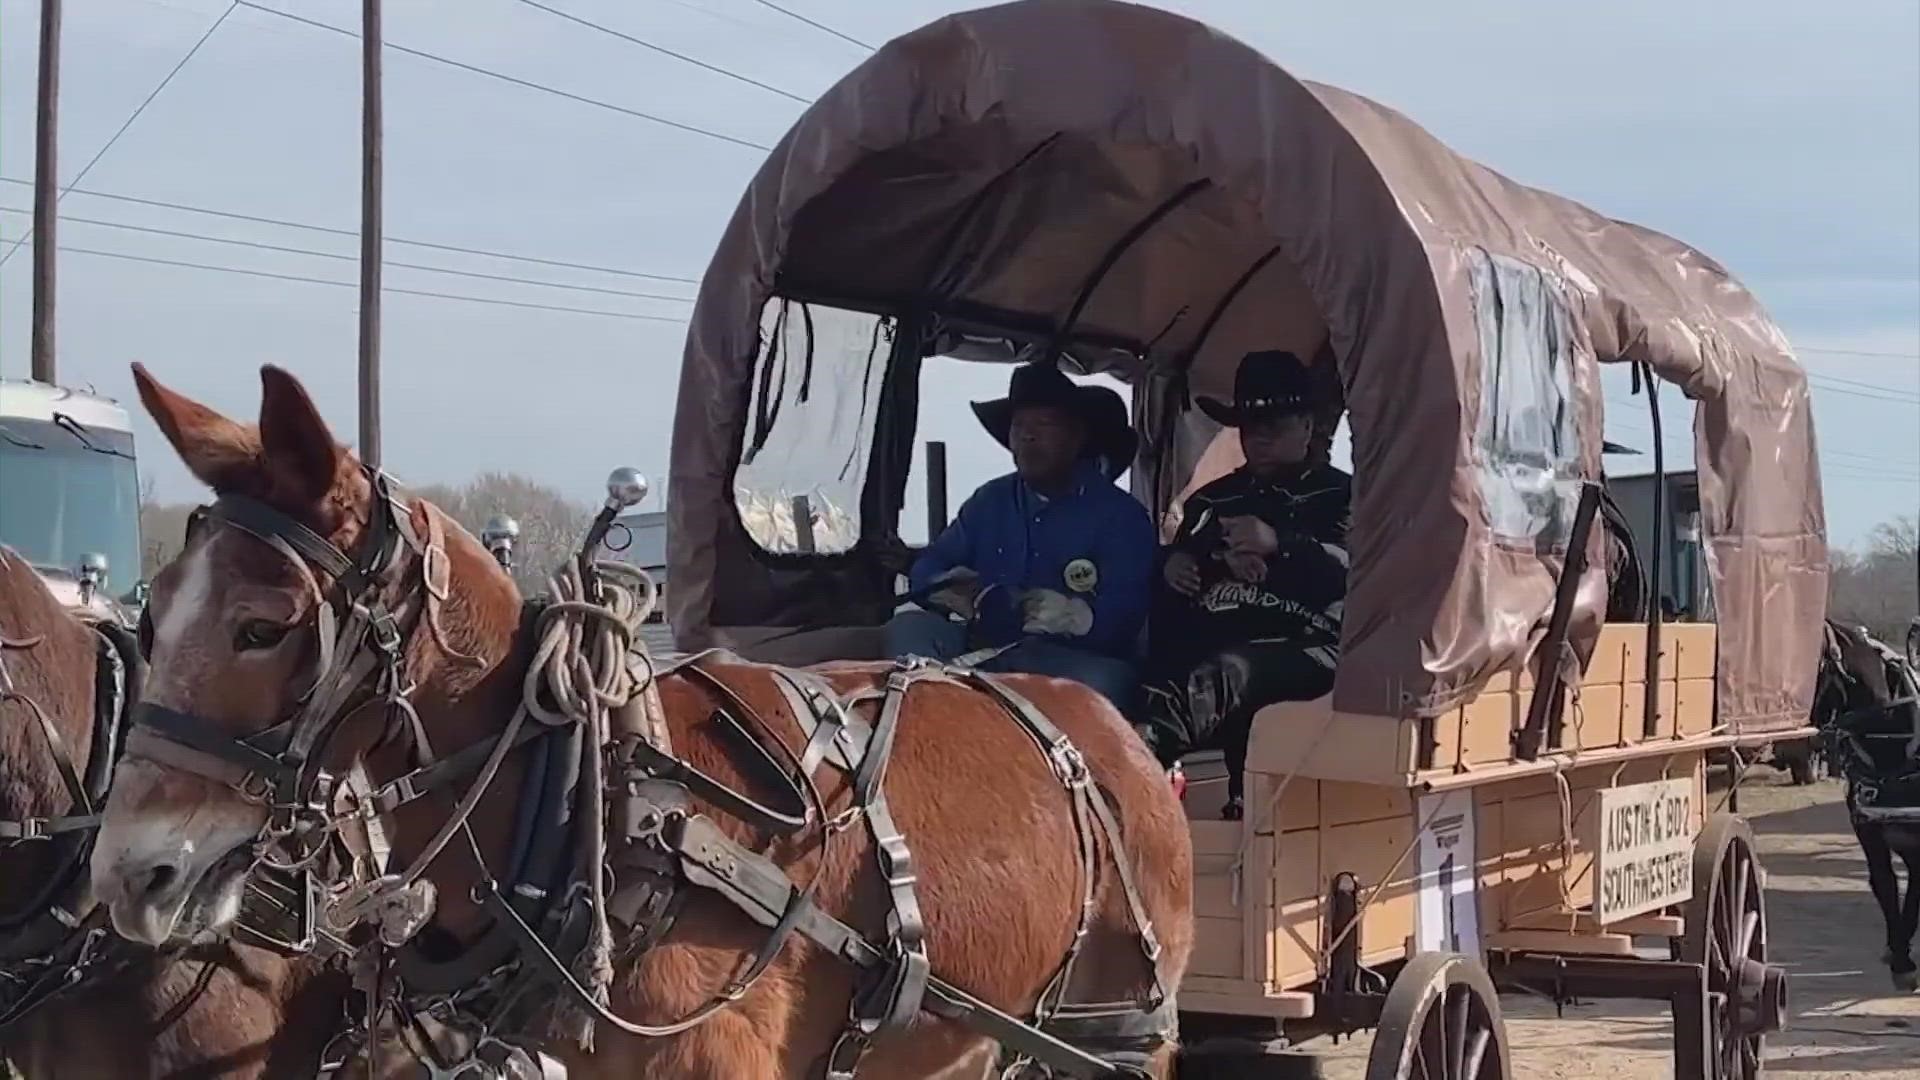 The Southwestern Trailride got underway Sunday on its way to Houston's Memorial Park before Saturday's paraqde.